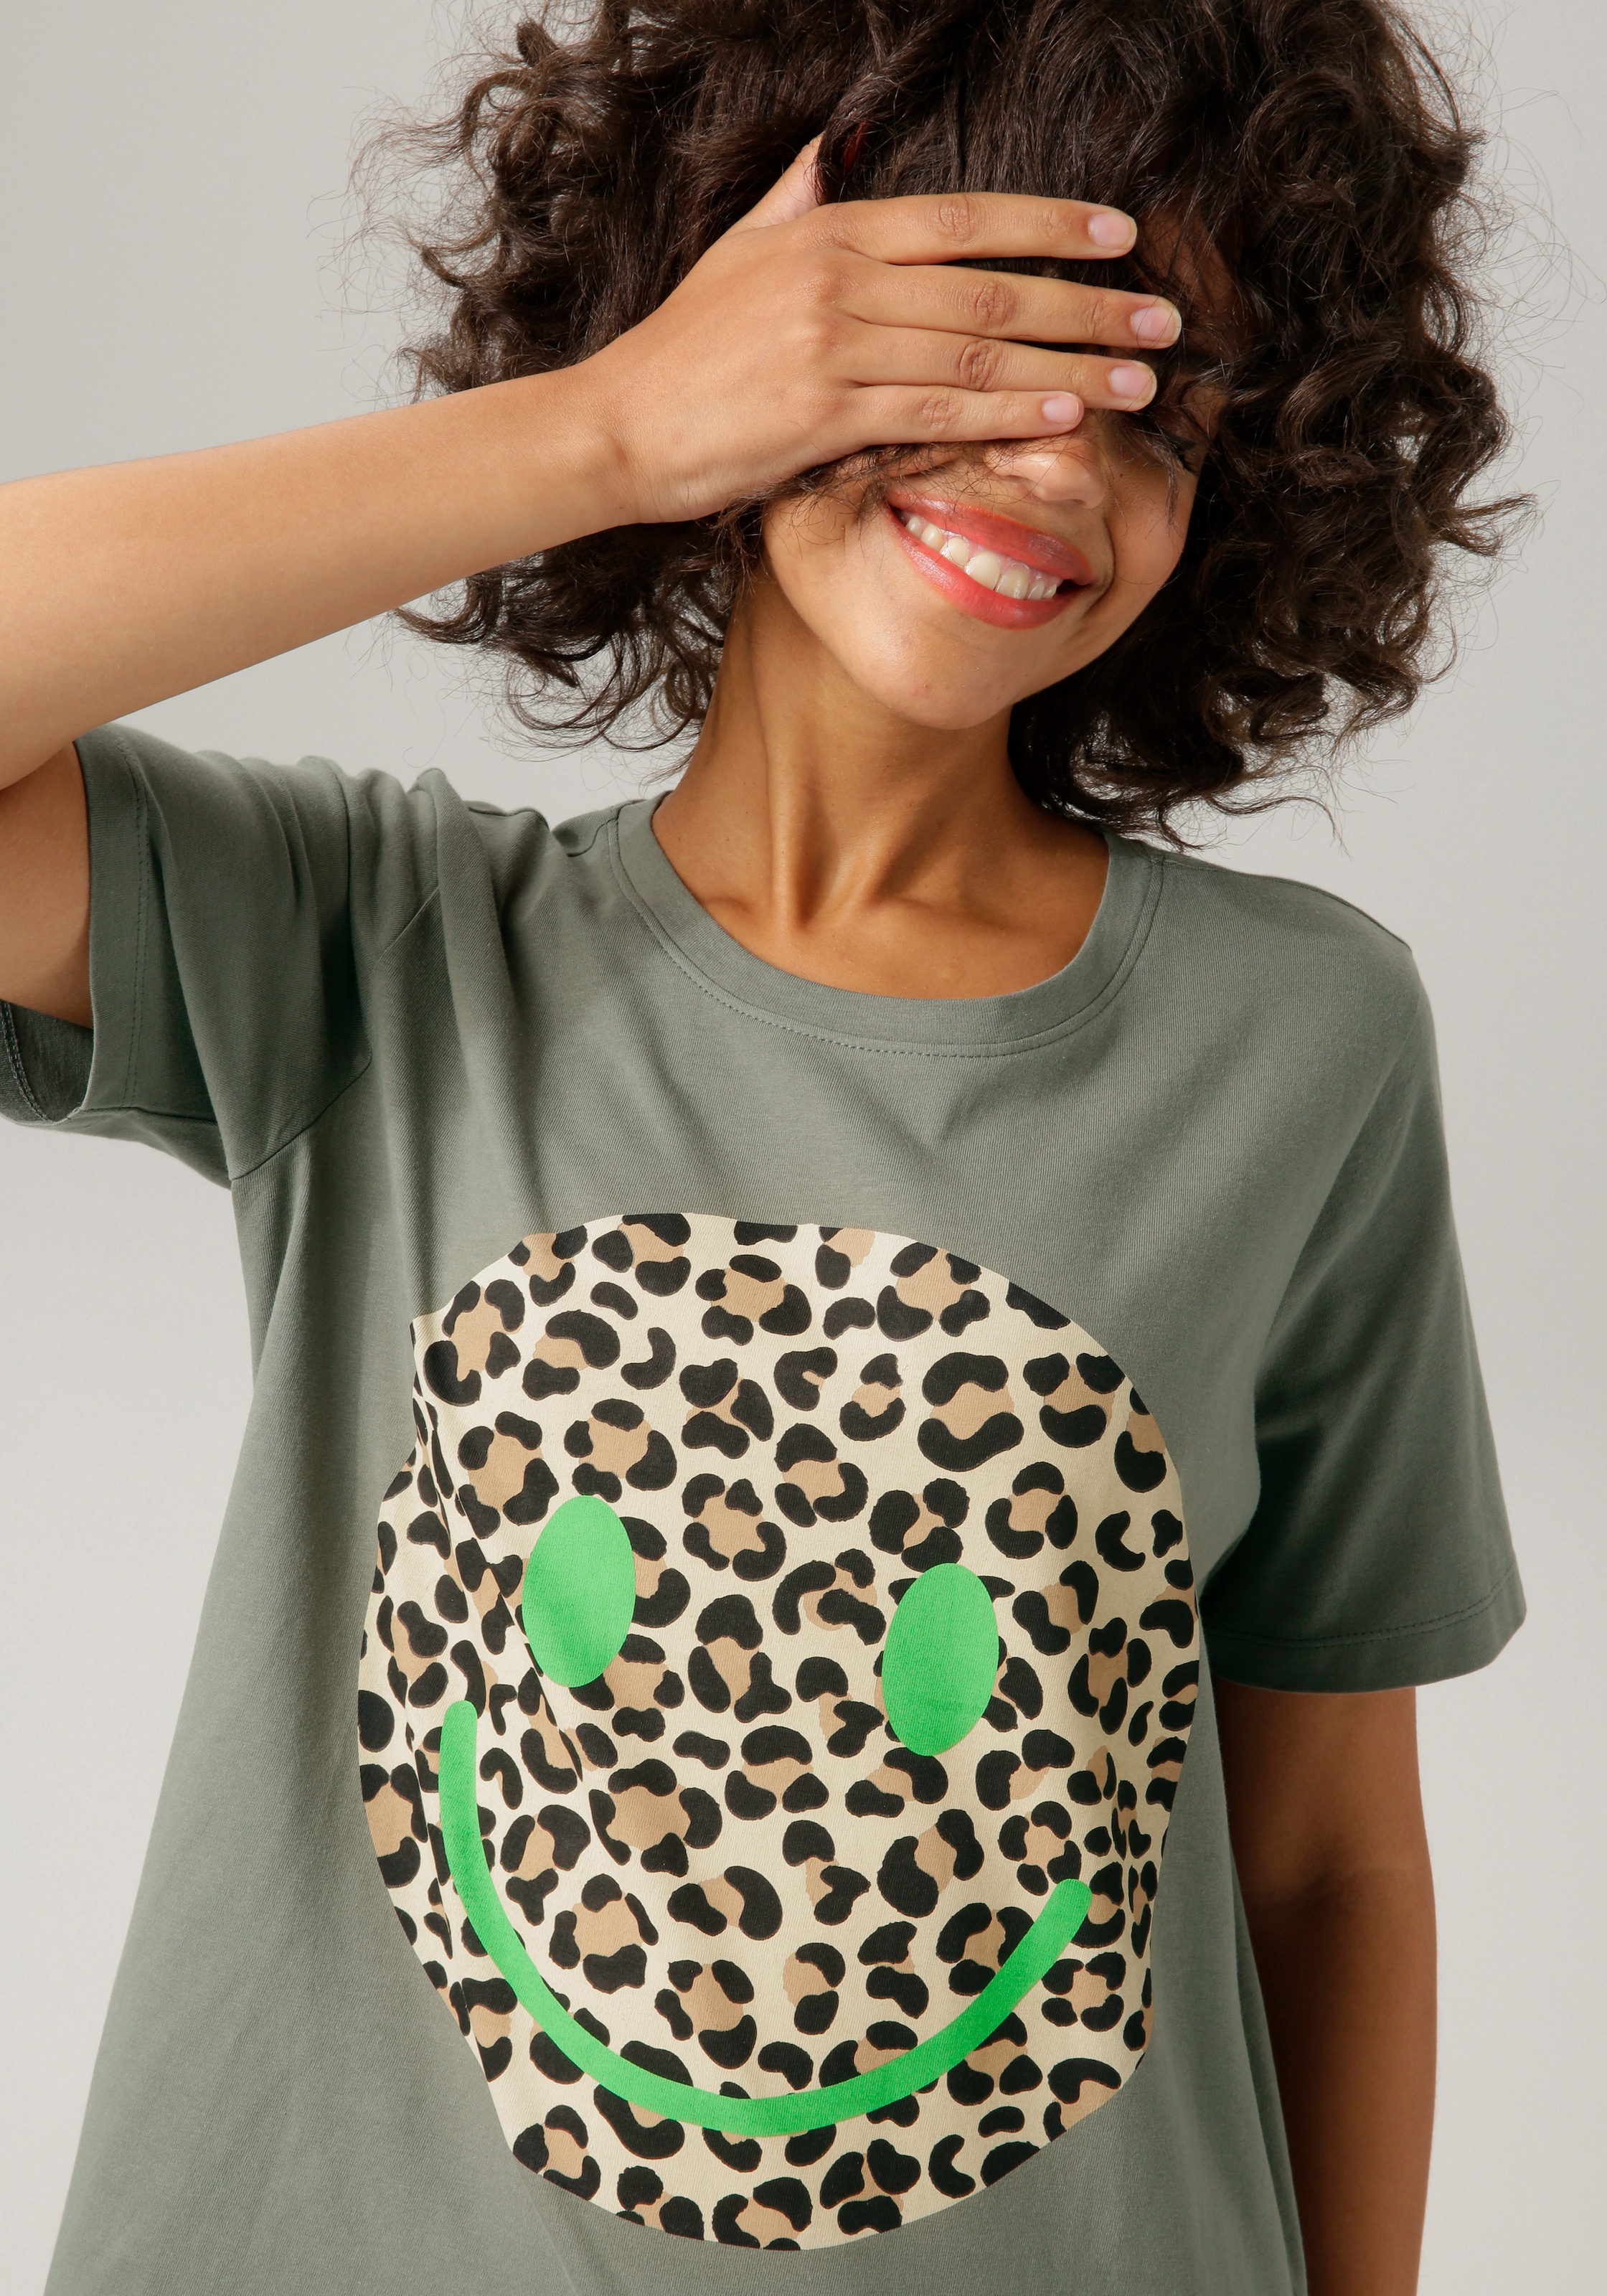 Aniston CASUAL T-Shirt, mit Smiley-Frontprint im Animal-Look